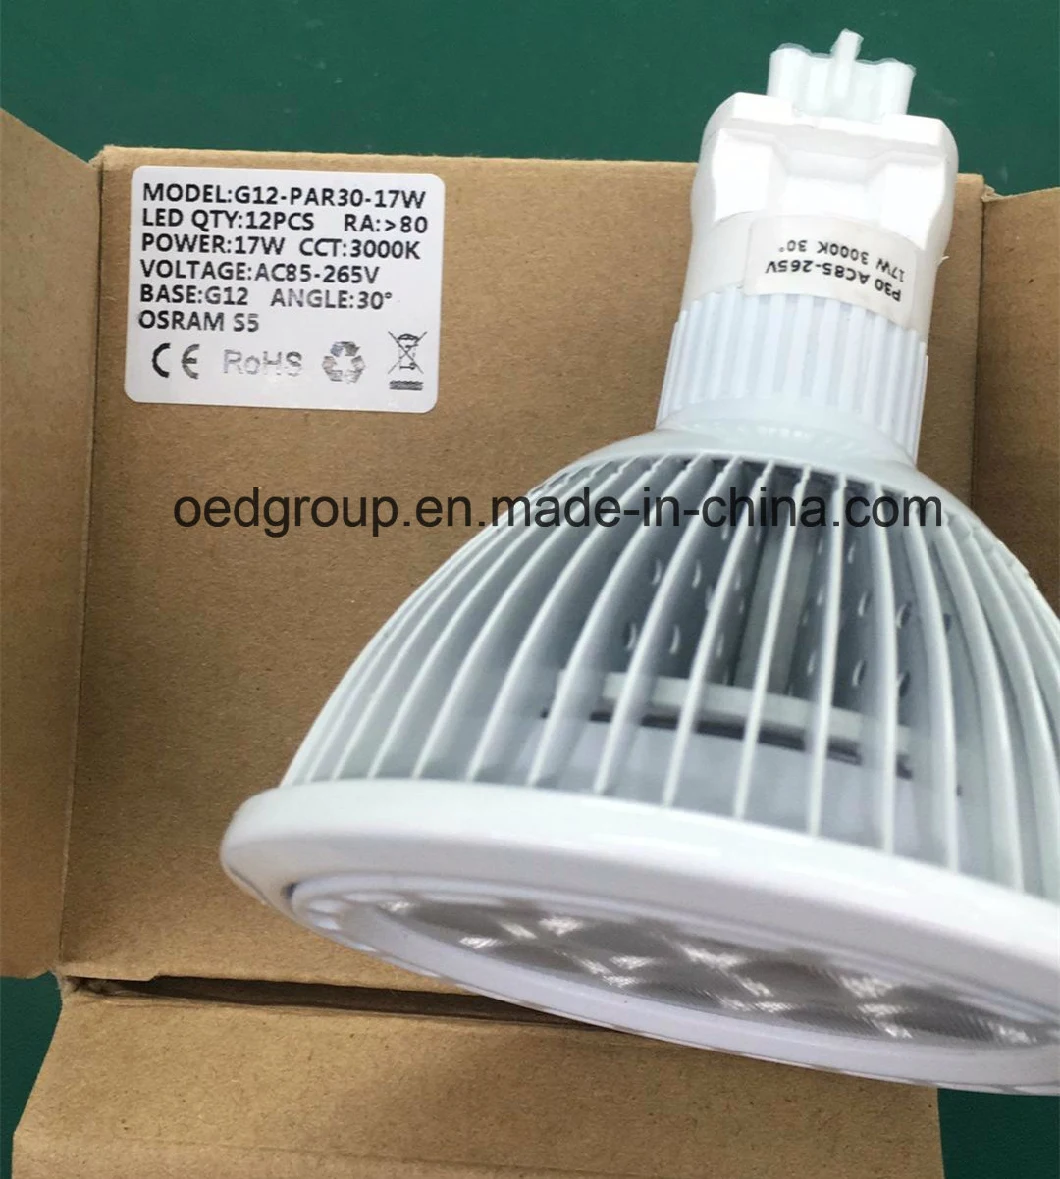 G12 G8.5 17W LED Spot Lamp to Replace 170W Halogen Lamp with G12 or G8.5 Base